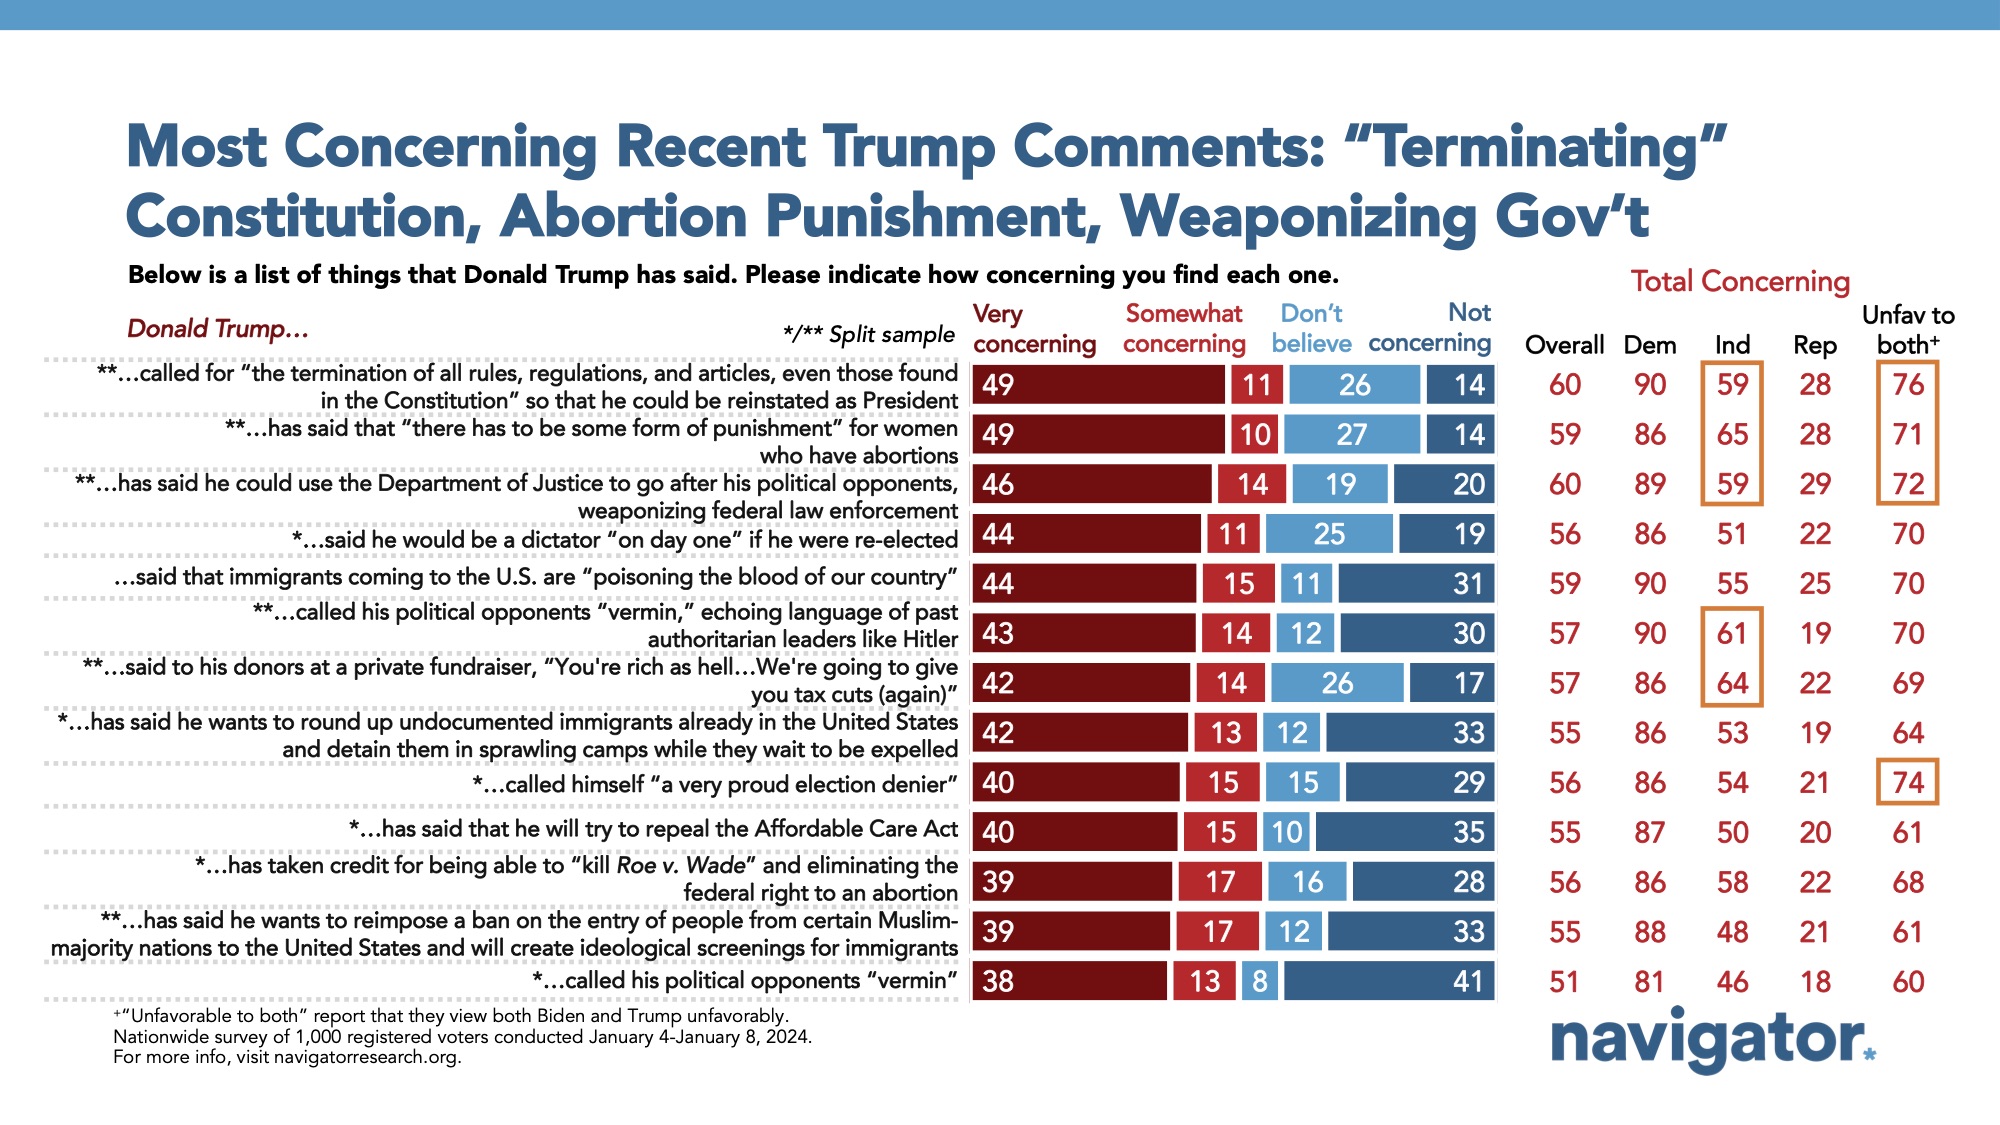 Bar graph of polling data from Navigator Research. Title: Most Concerning Recent Trump Comments: “Terminating” Constitution, Abortion Punishment, Weaponizing Gov’t